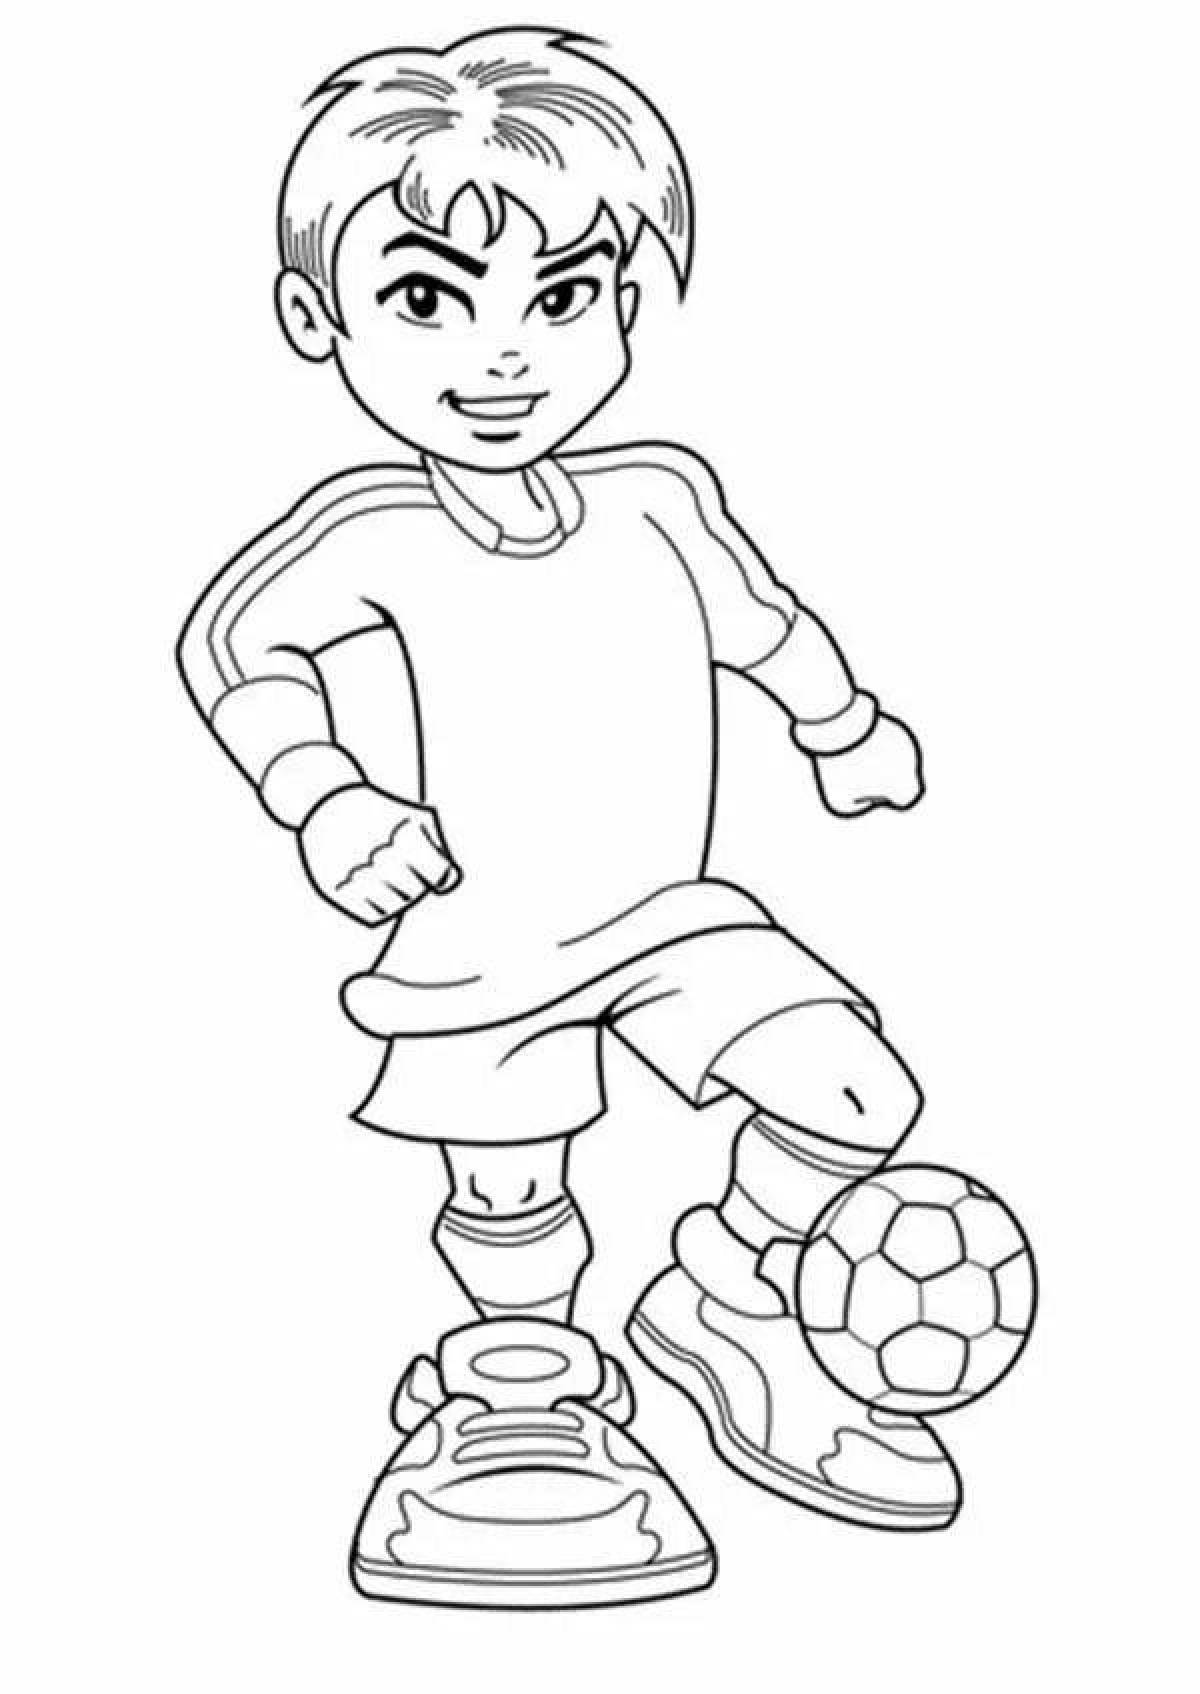 Coloring page funny football player for kids